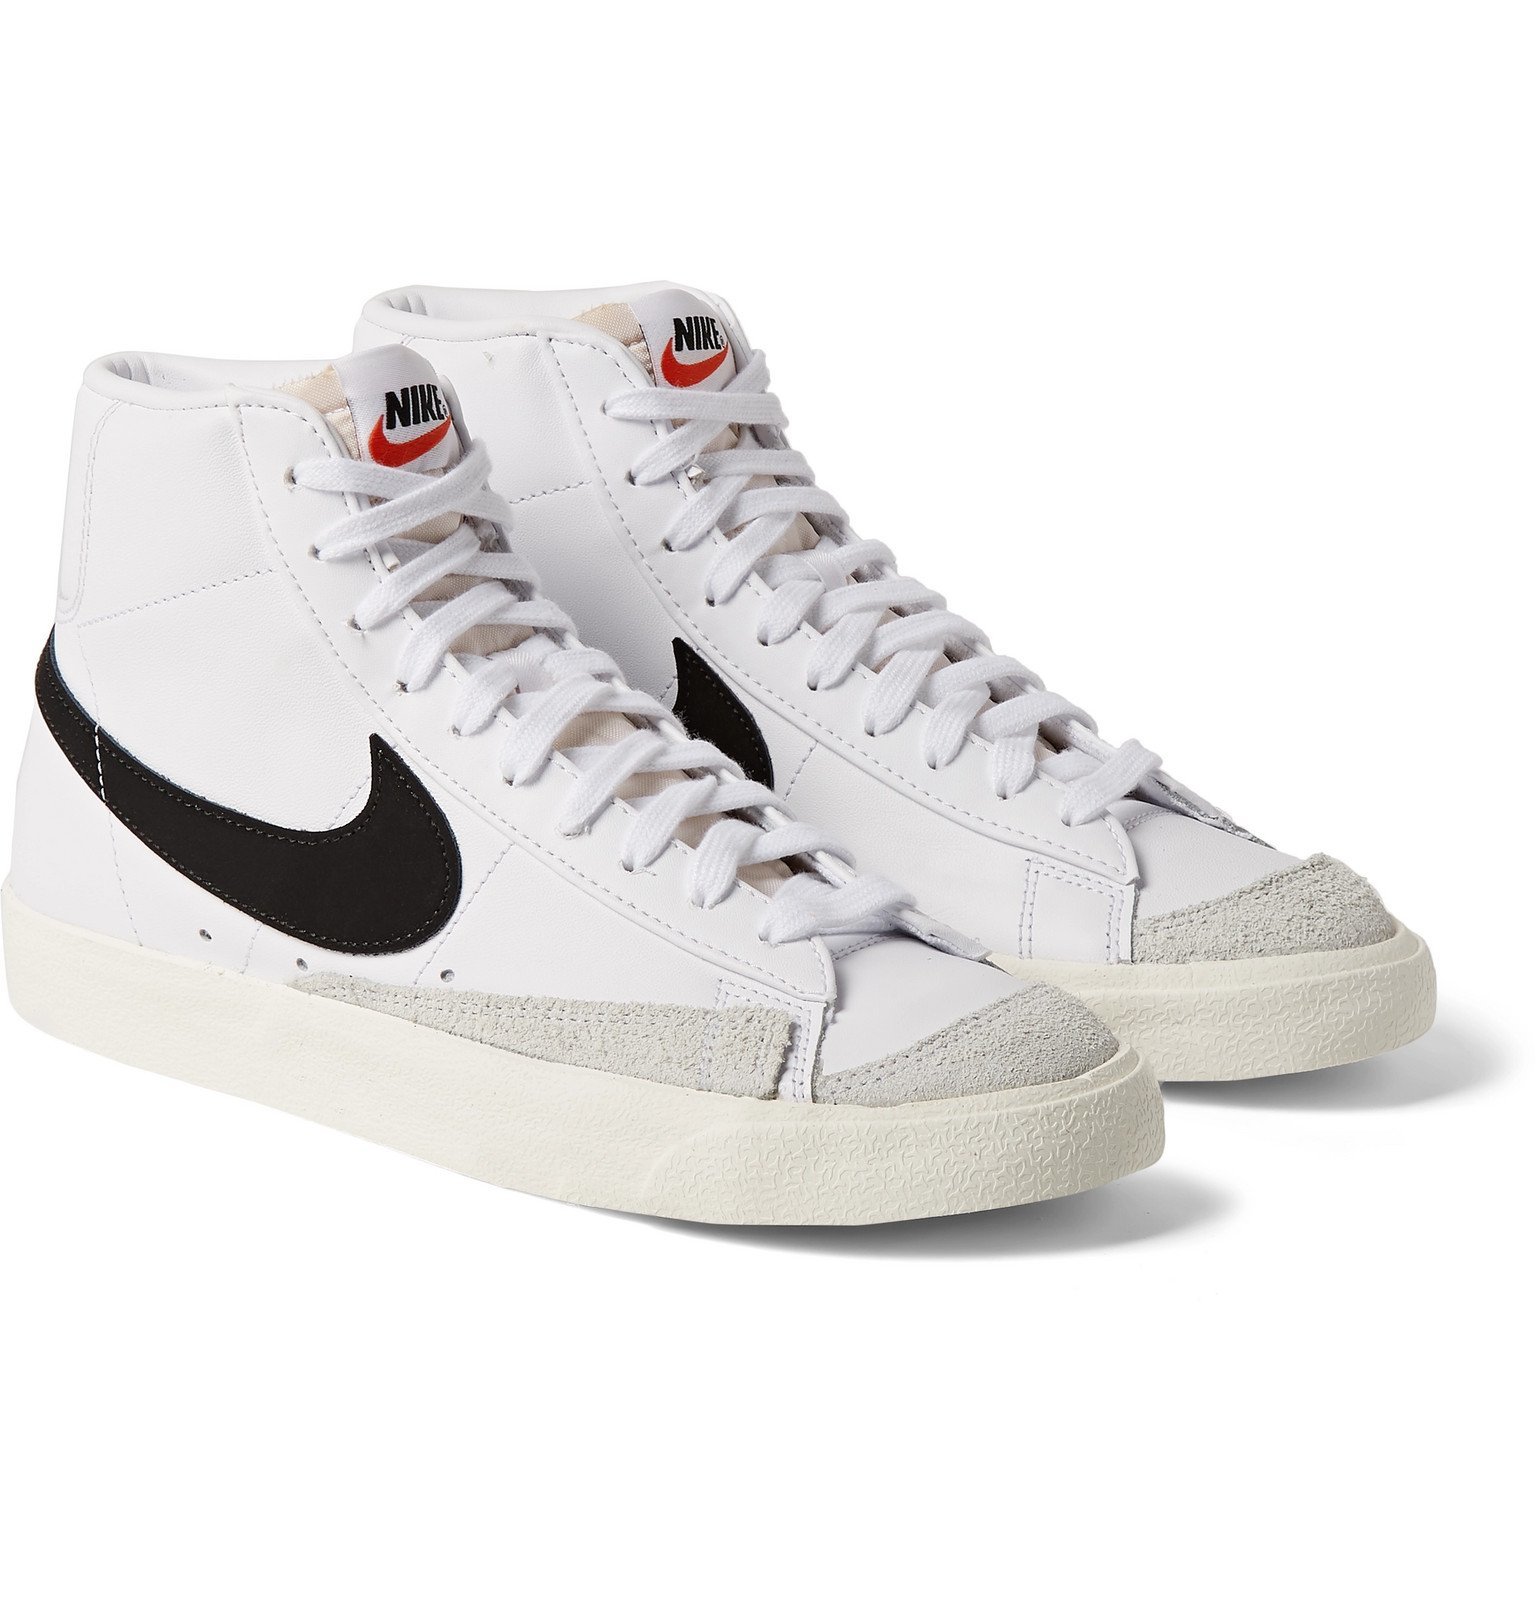 Nike - Blazer Mid '77 Suede-Trimmed Leather Sneakers - White Nike قطع غيار بورش